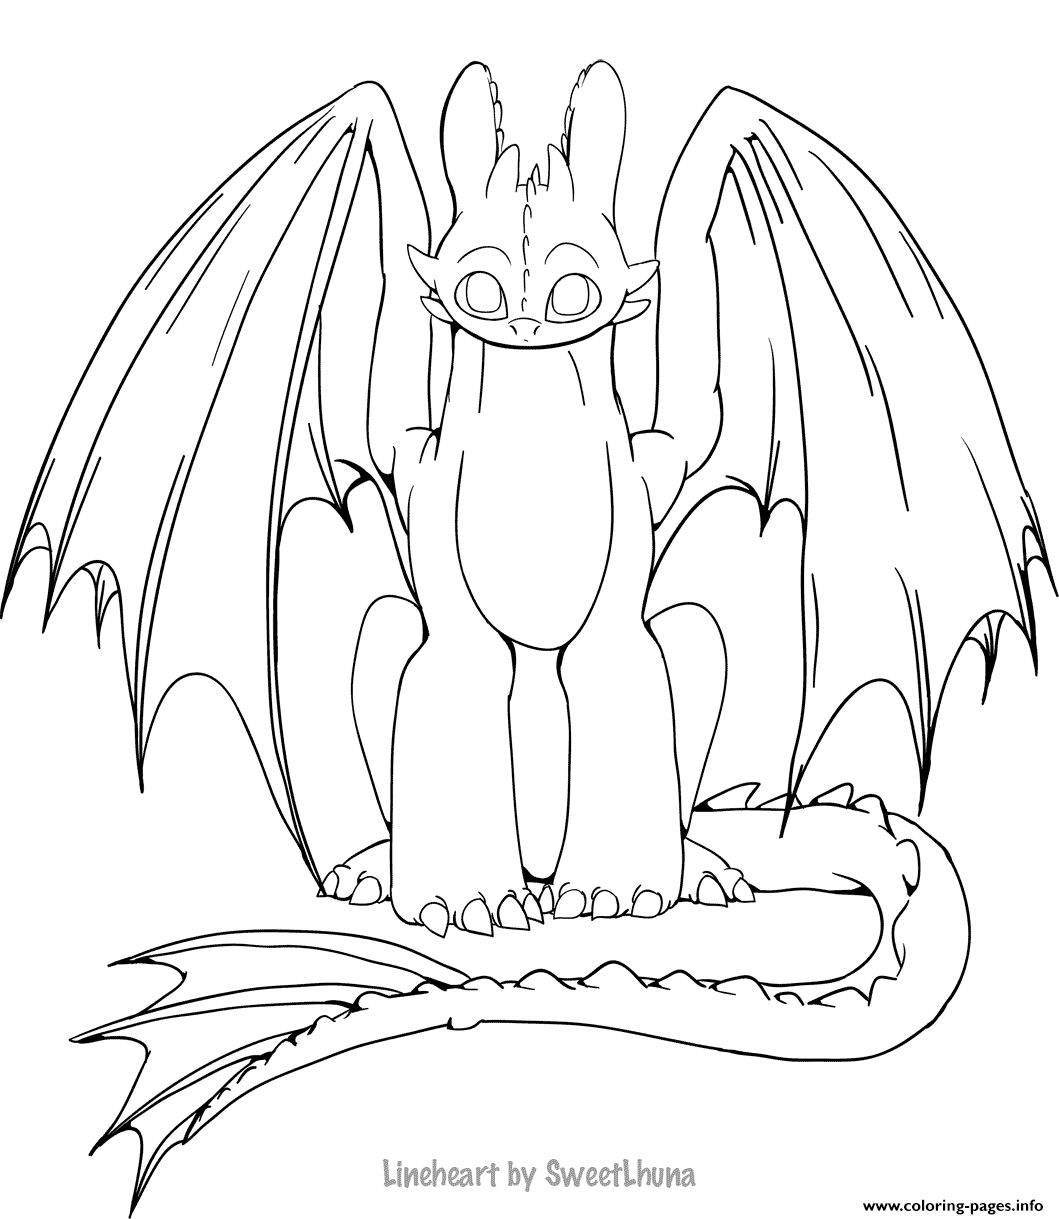 Toothless Lineheart By SweetLhuna coloring